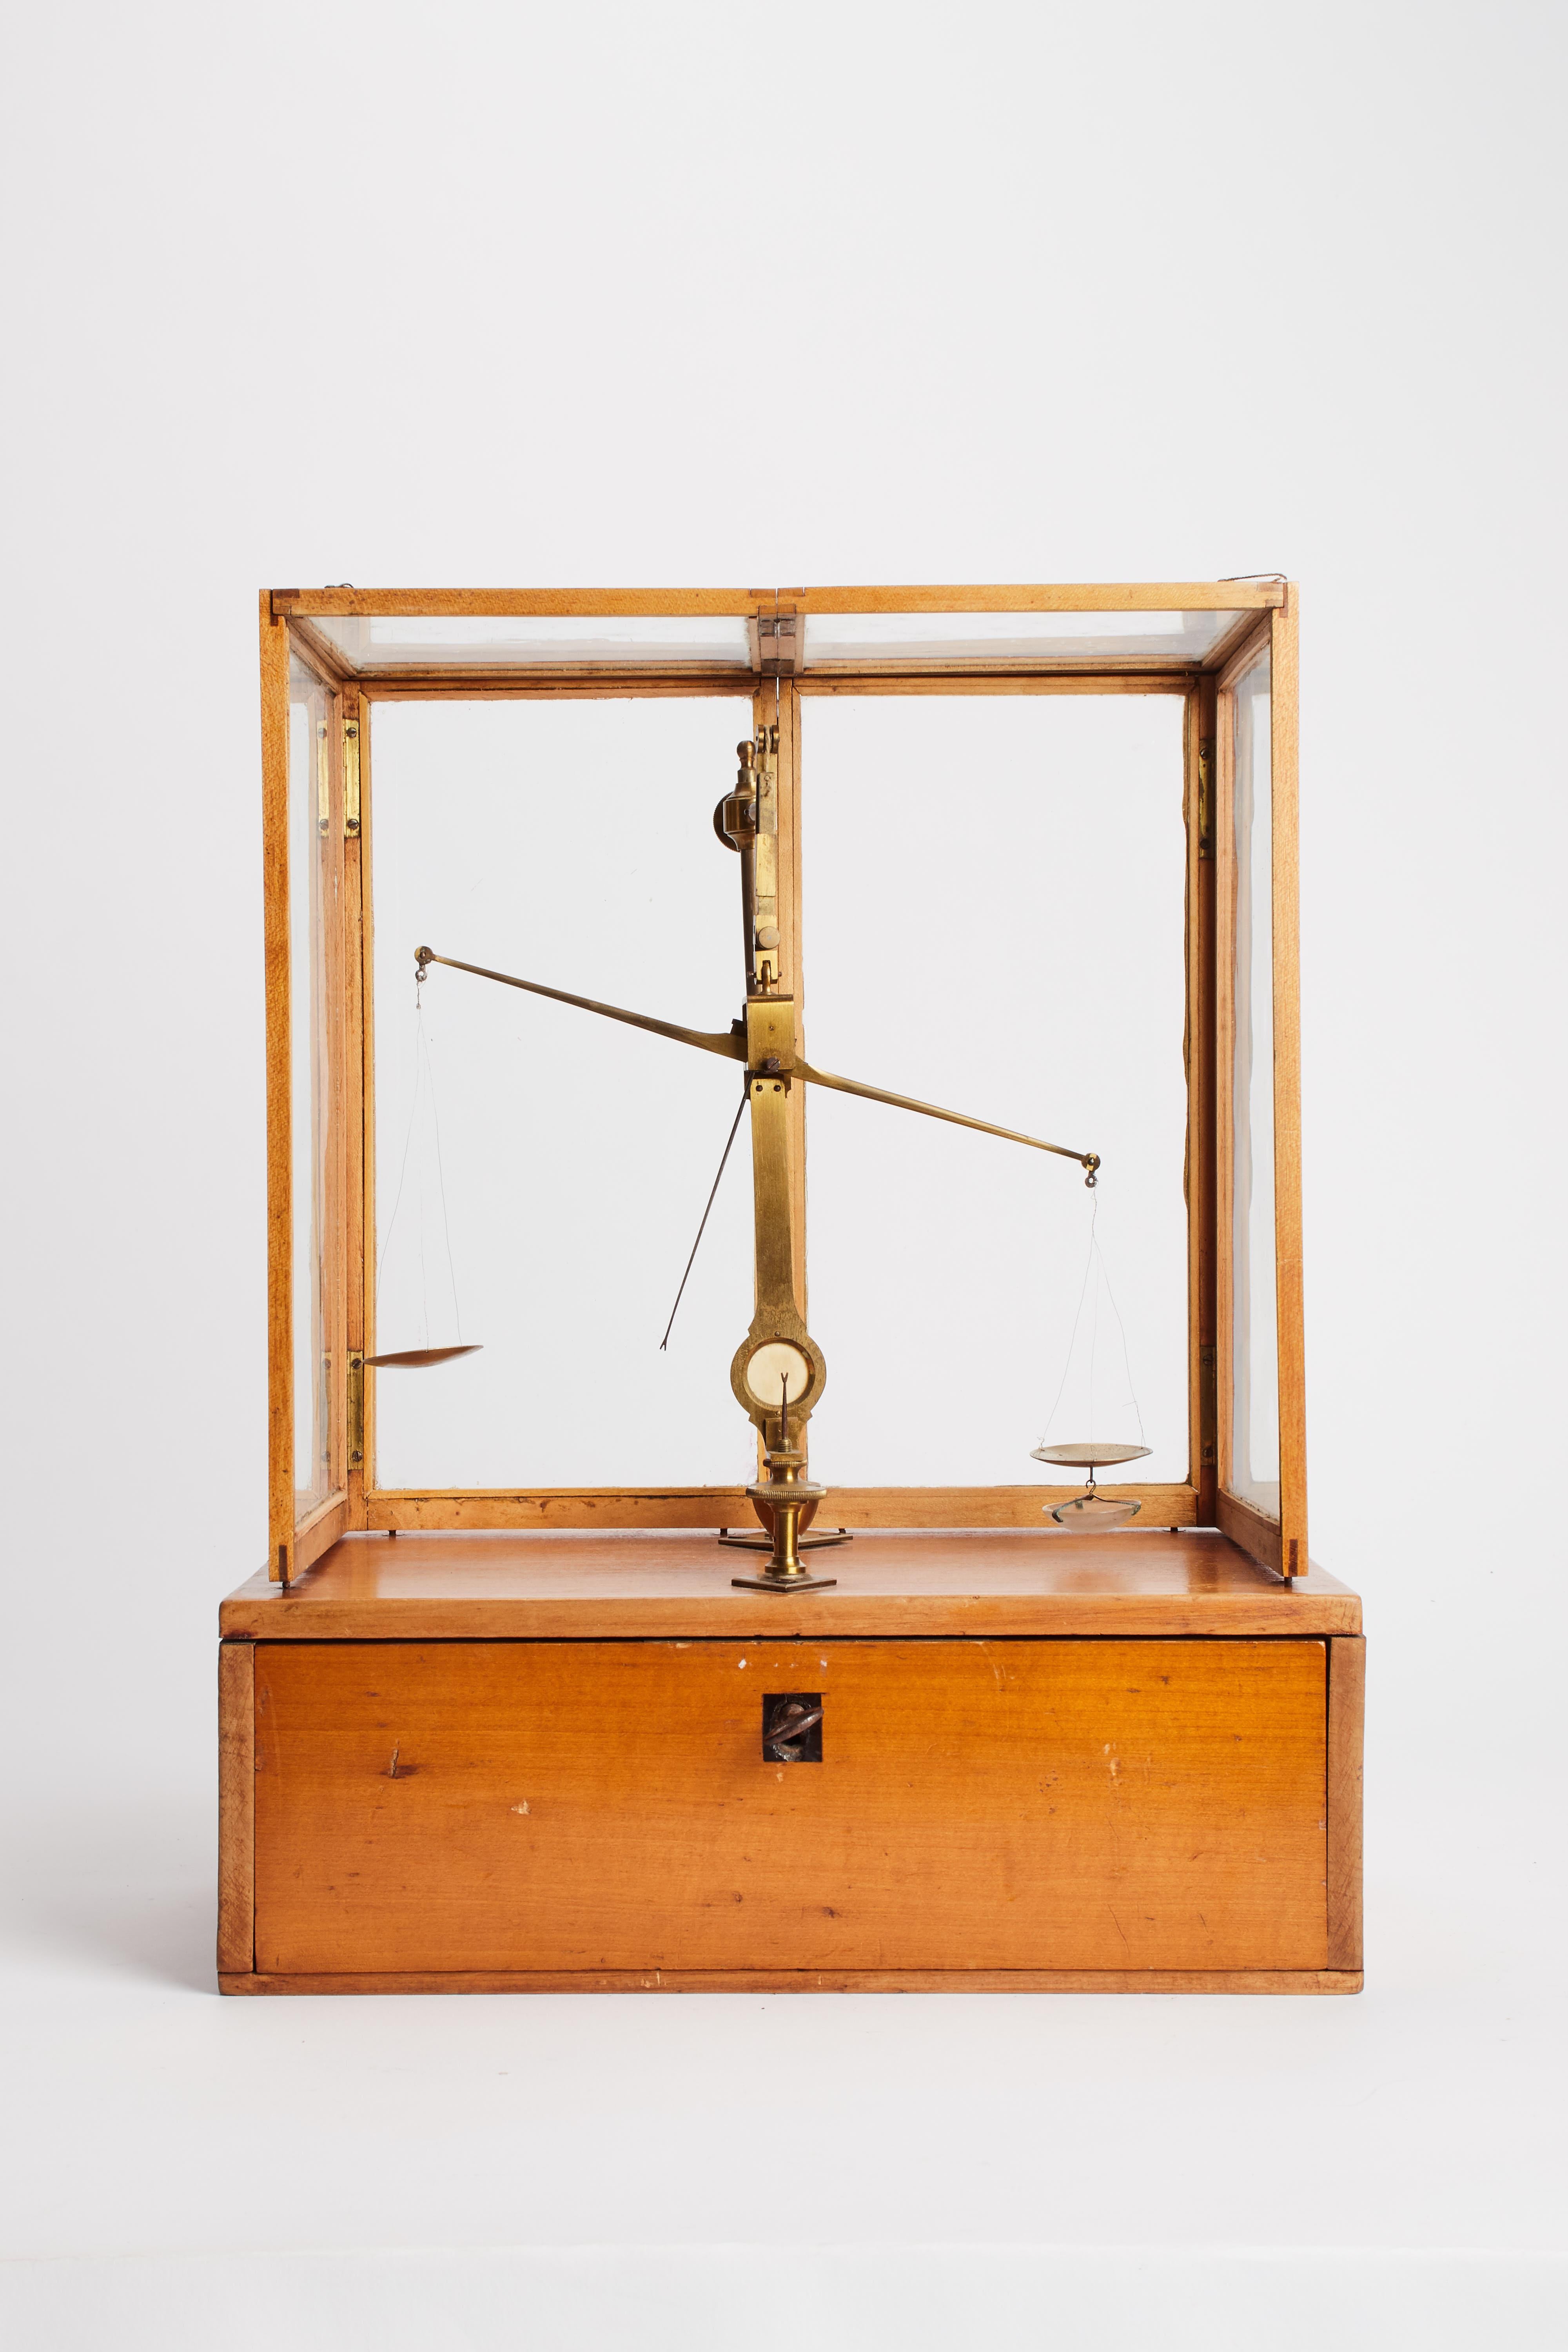 Apothecary traveling scale entirely demountable. All the pieces fits inside the front drawer. Oak wood box, brass elements and glasses. Glass protection sides. France 1880.